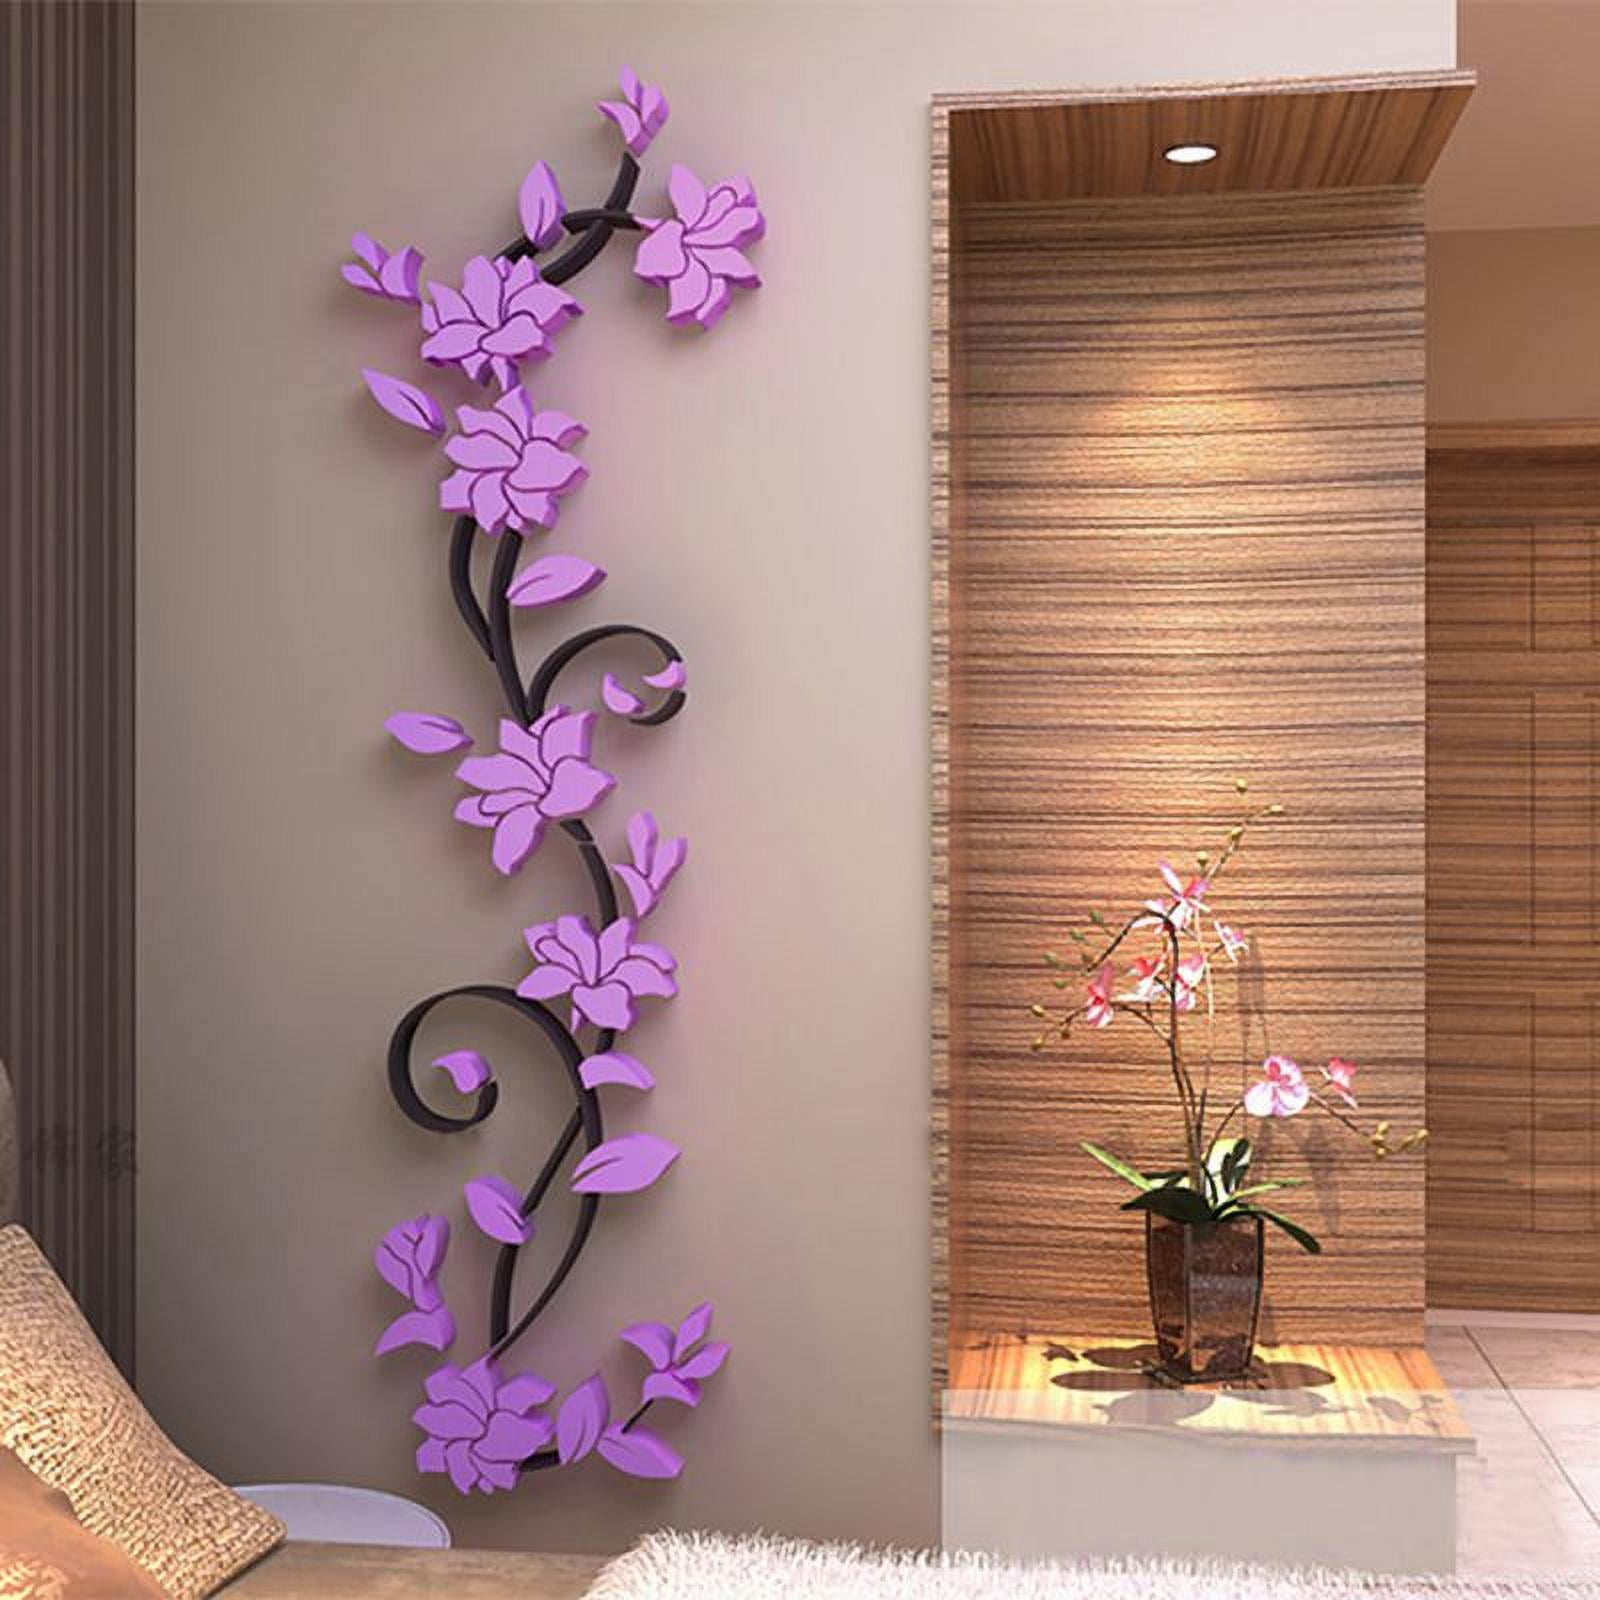 Details about   3D Flower Decal Vinyl Decor Art Home Living Room Wall Sticker Removable Mural US 